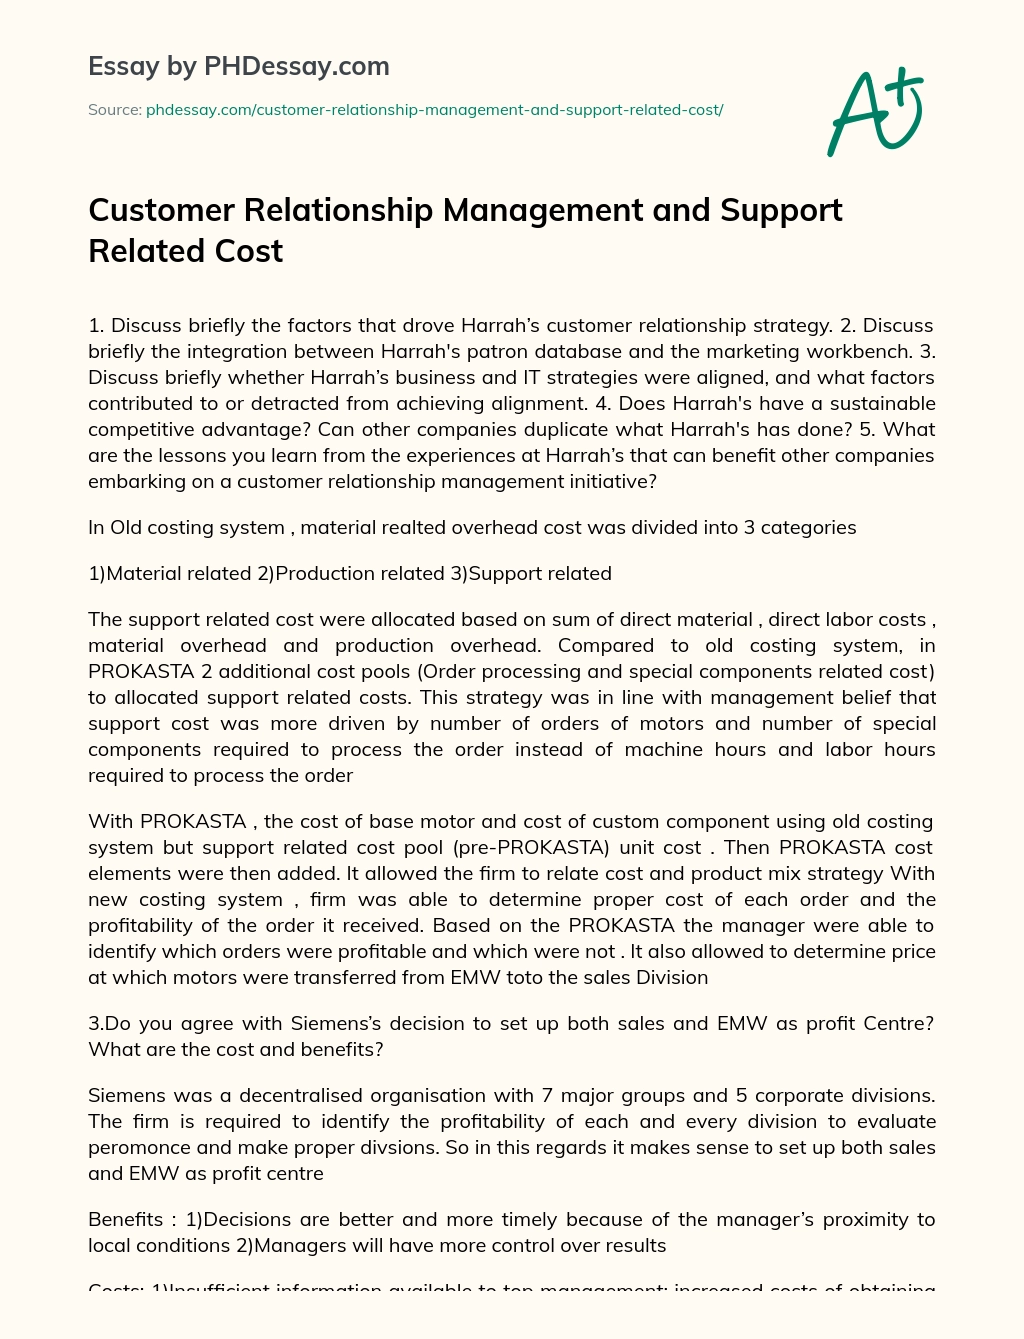 Customer Relationship Management and Support Related Cost essay